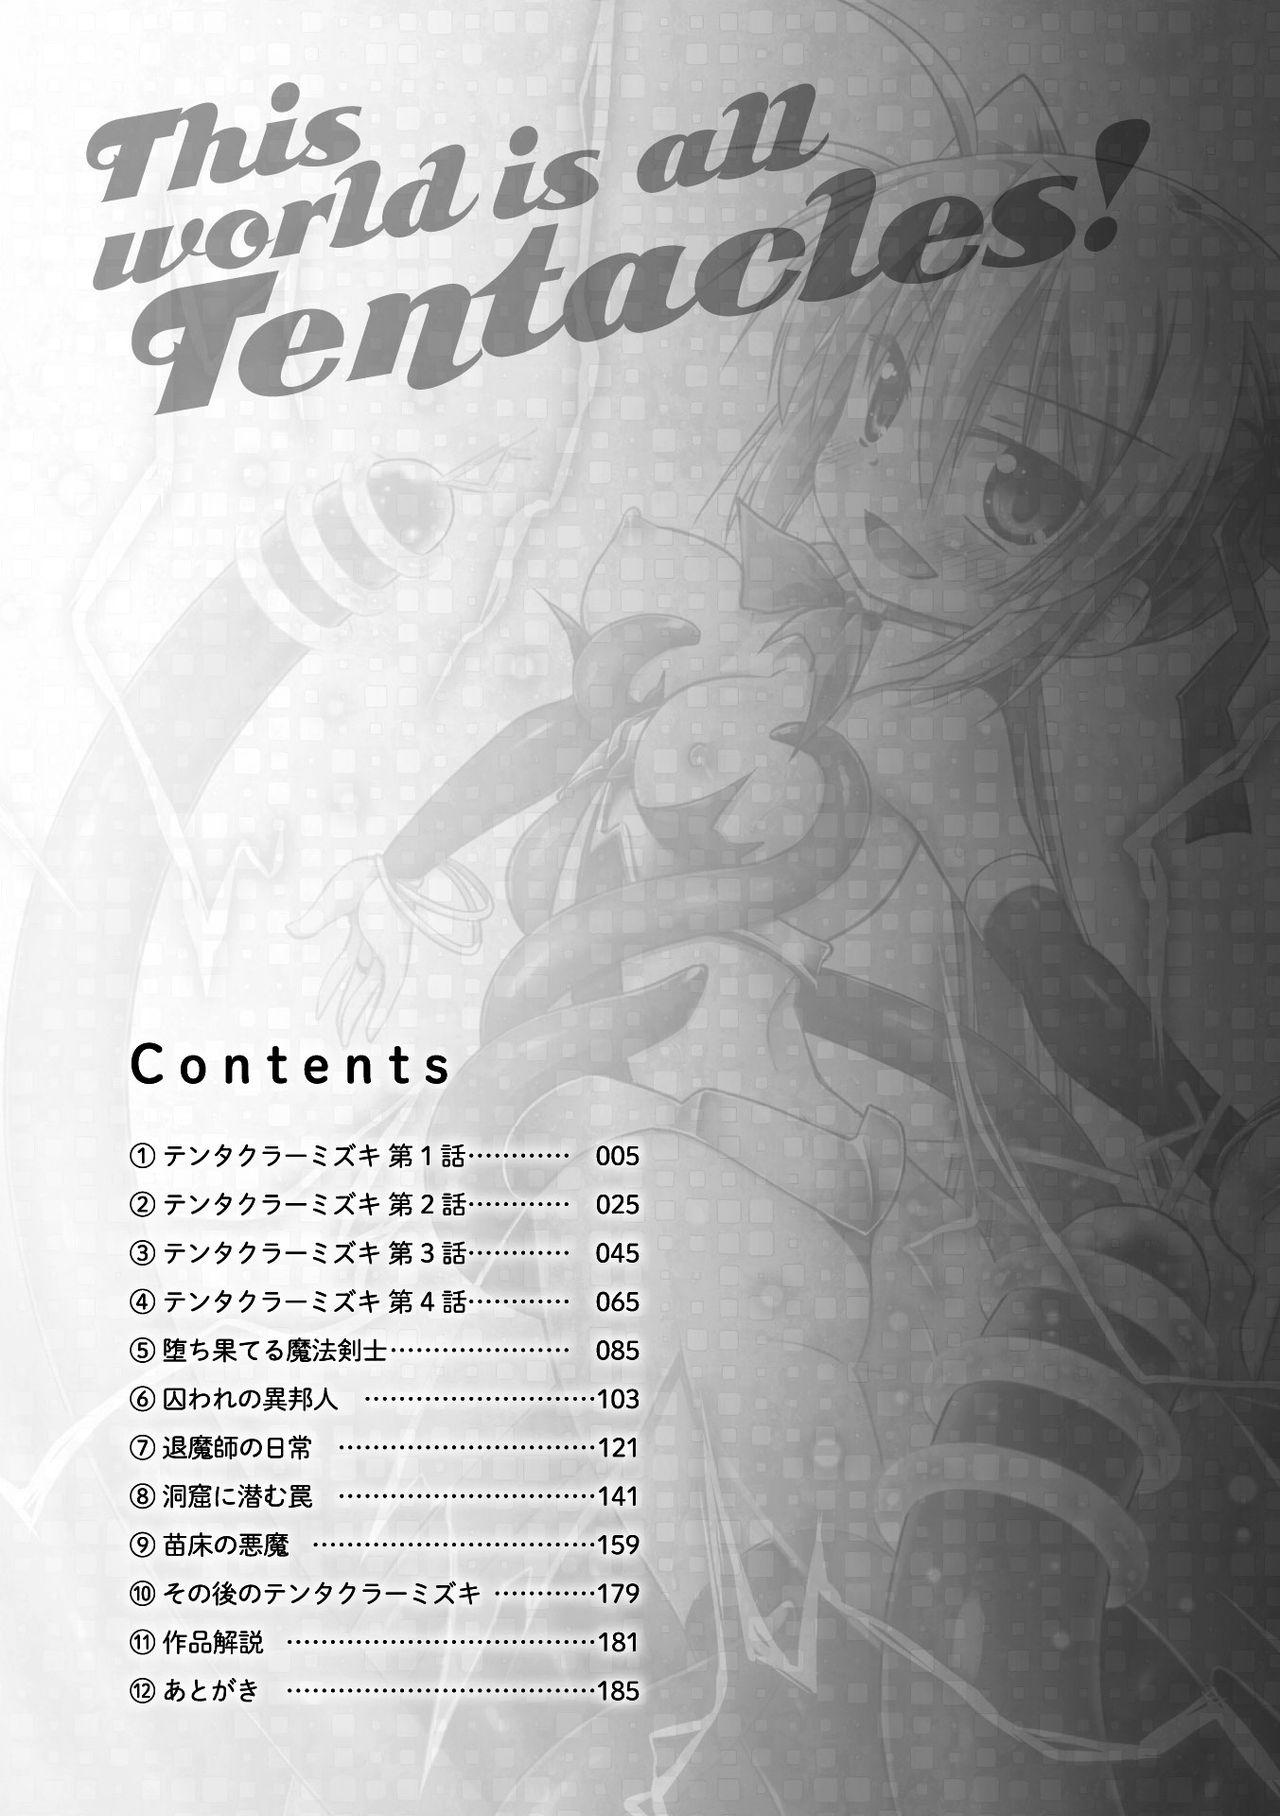 Thuylinh This World is all Tentacles | Konoyo wa Subete Tentacle! Outdoor - Page 4